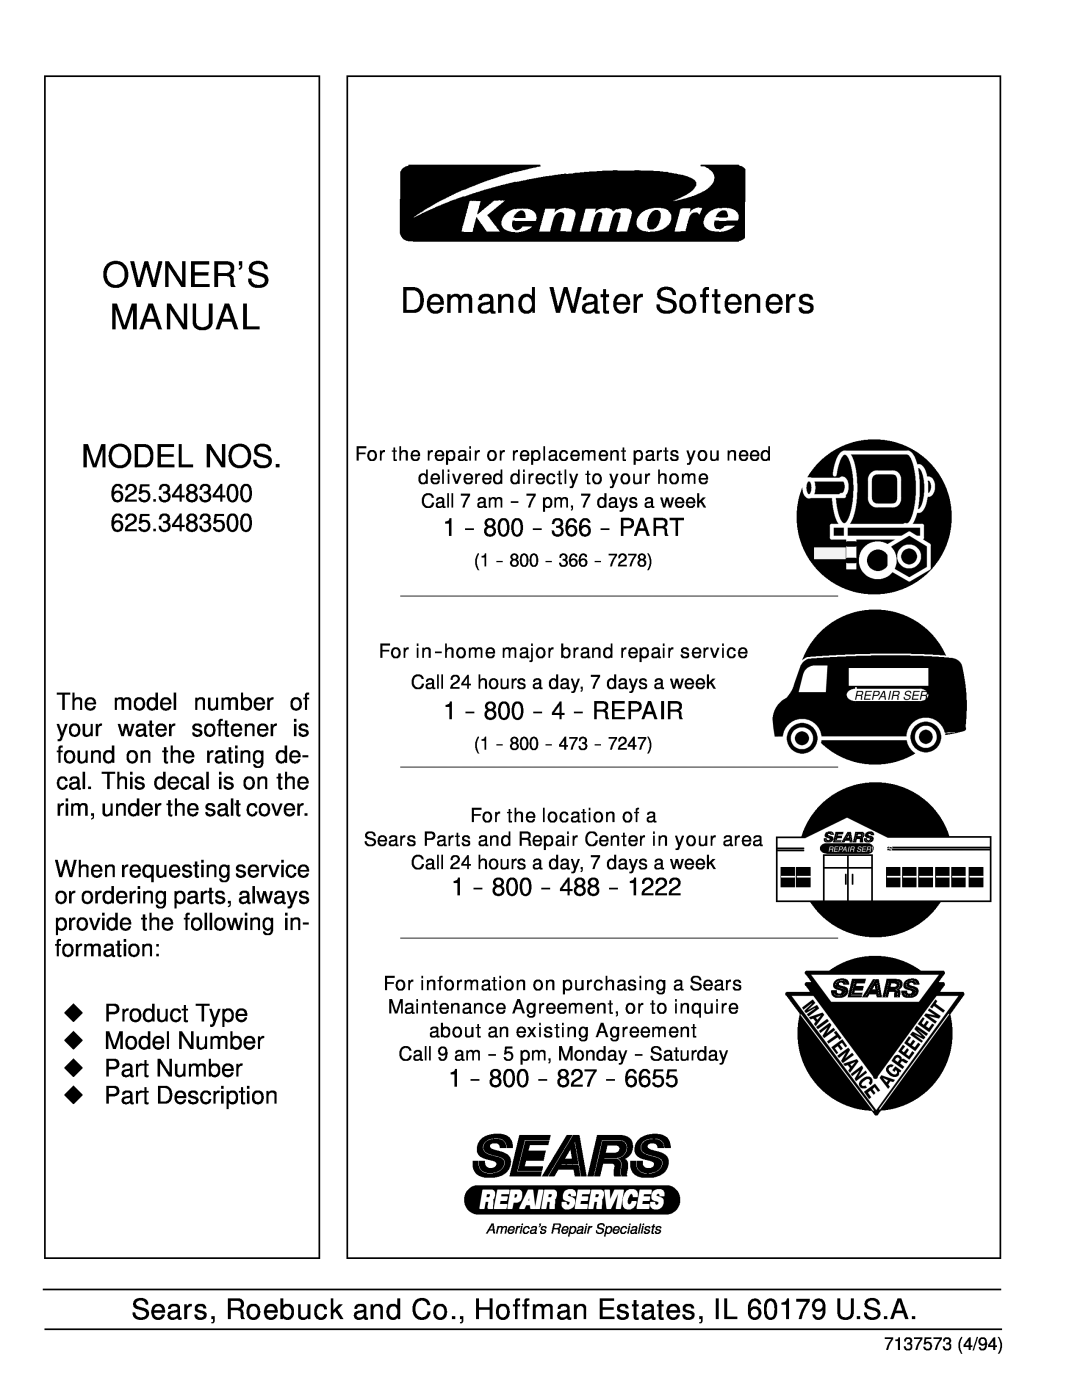 Kenmore 625.3485400 Owner’S Manual, Demand Water Softeners, Sears, Roebuck and Co., Hoffman Estates, IL 60179 U.S.A 